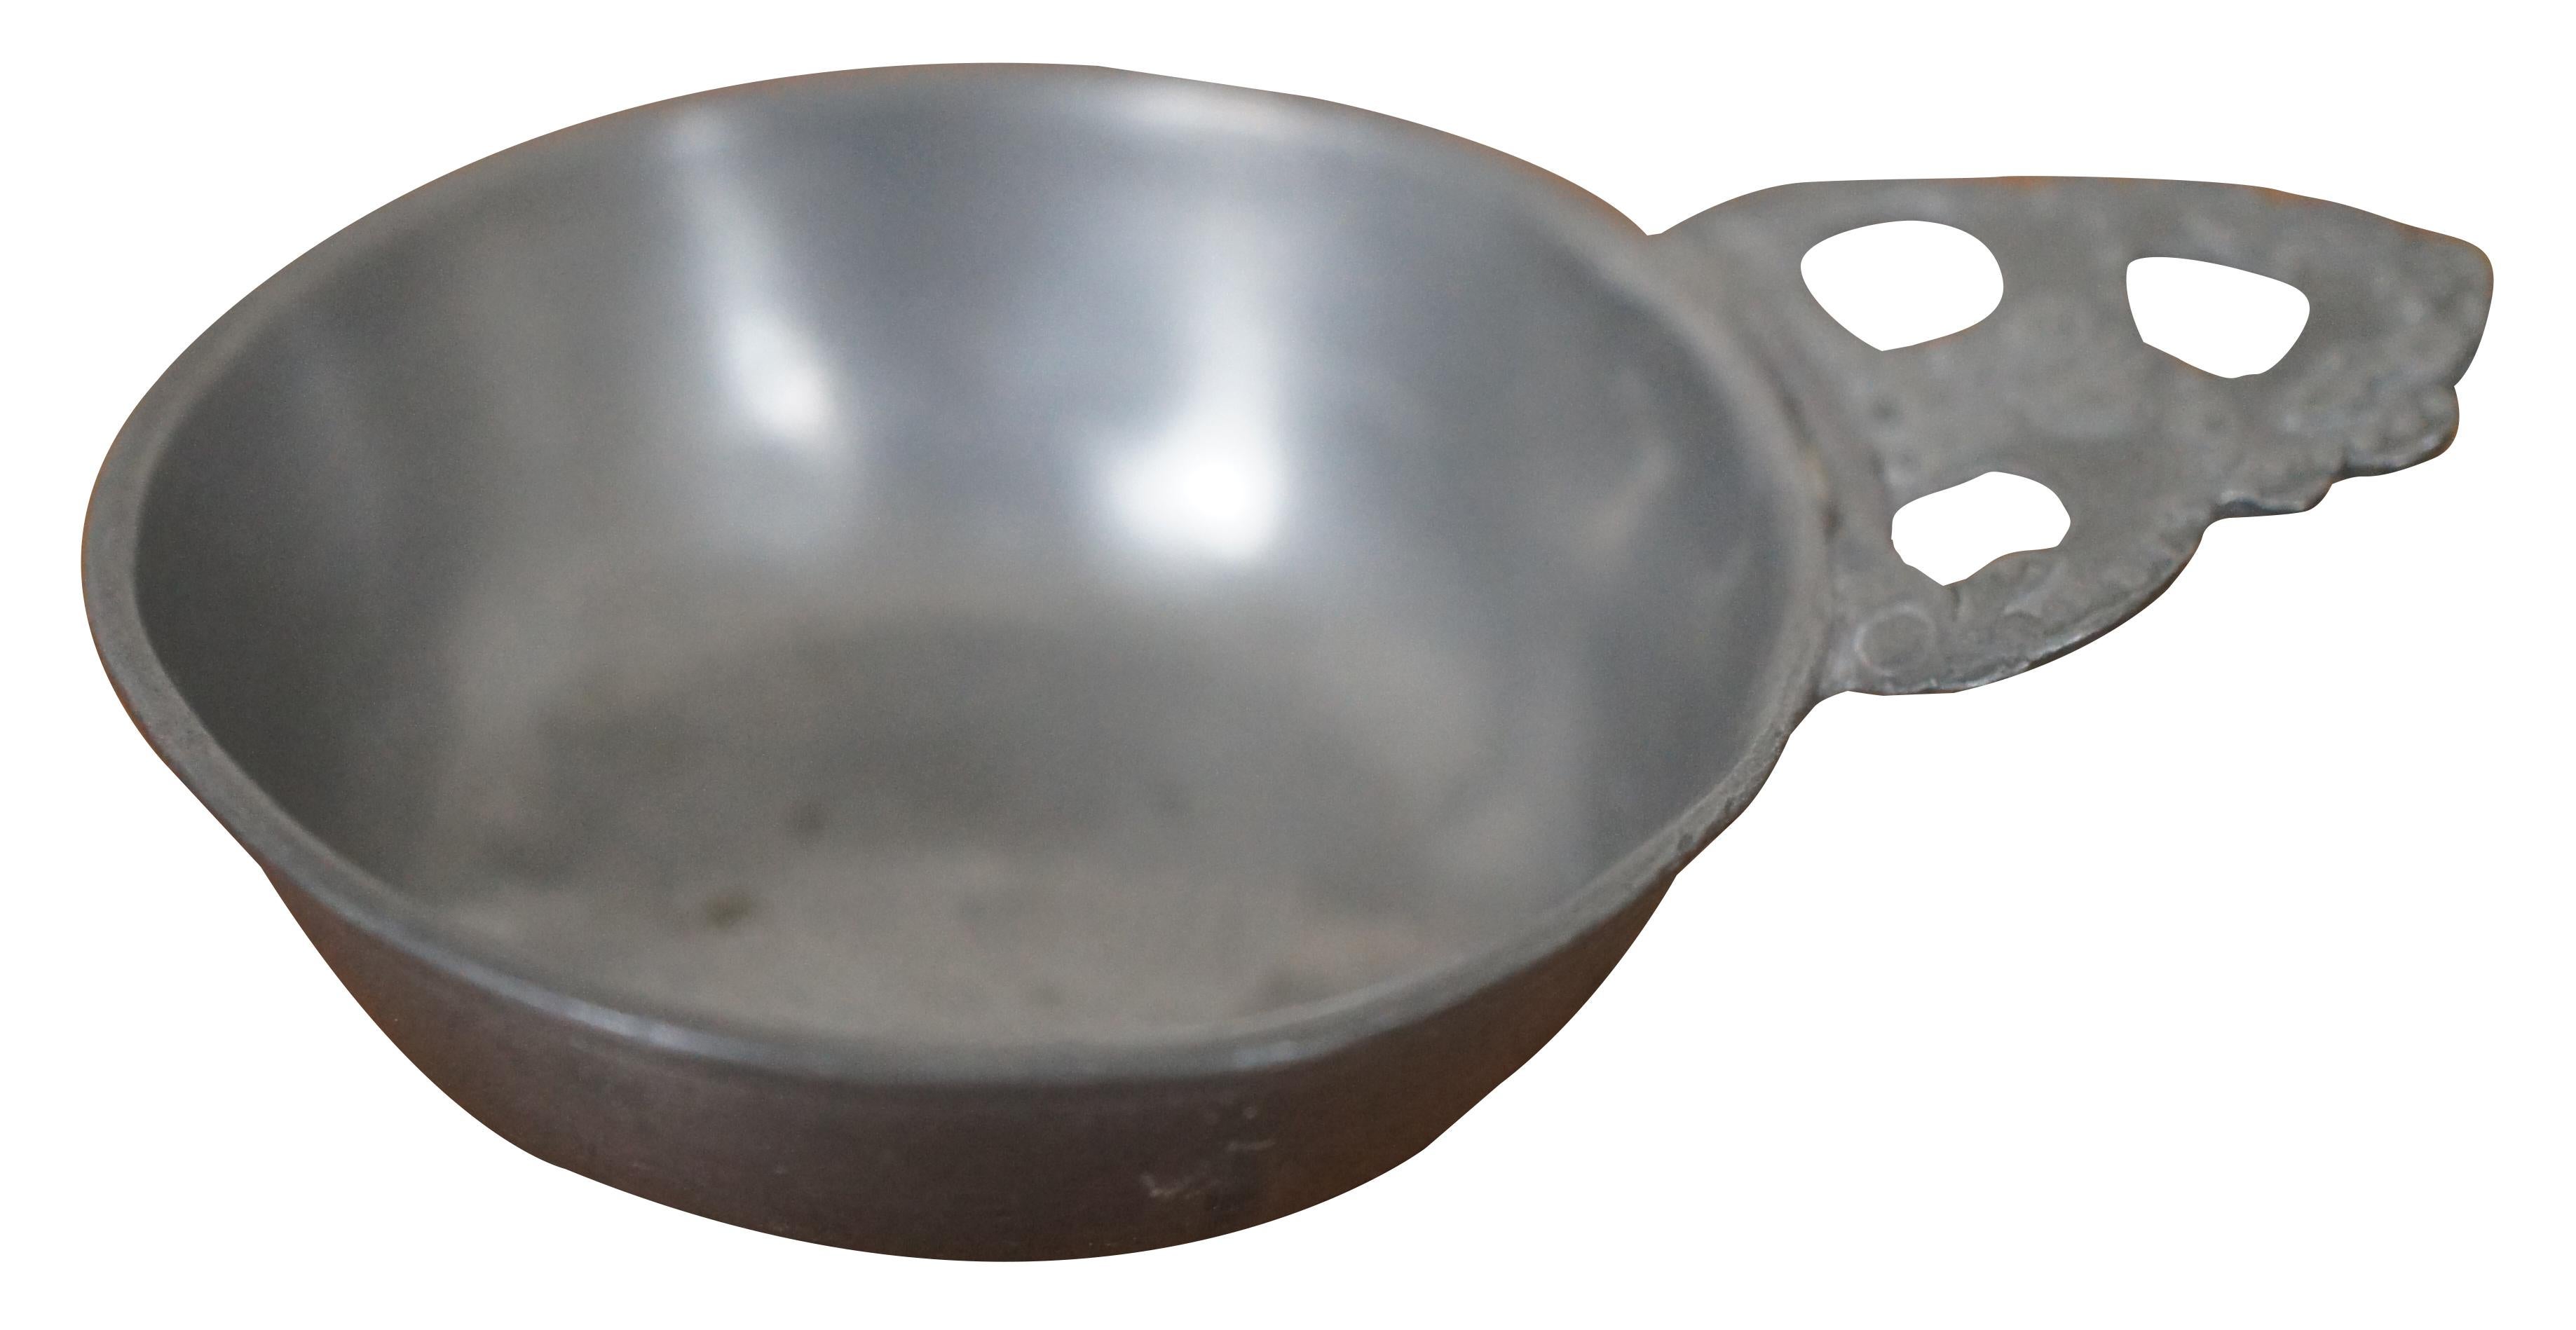 Antique circa 18th century childs pewter porringer / tastevin featuring straight sides with rim flange, flat base, triangular bracket with wedge under the ear, and primitive lobed ear. 

Porringers were small food bowls used for porridge or wine